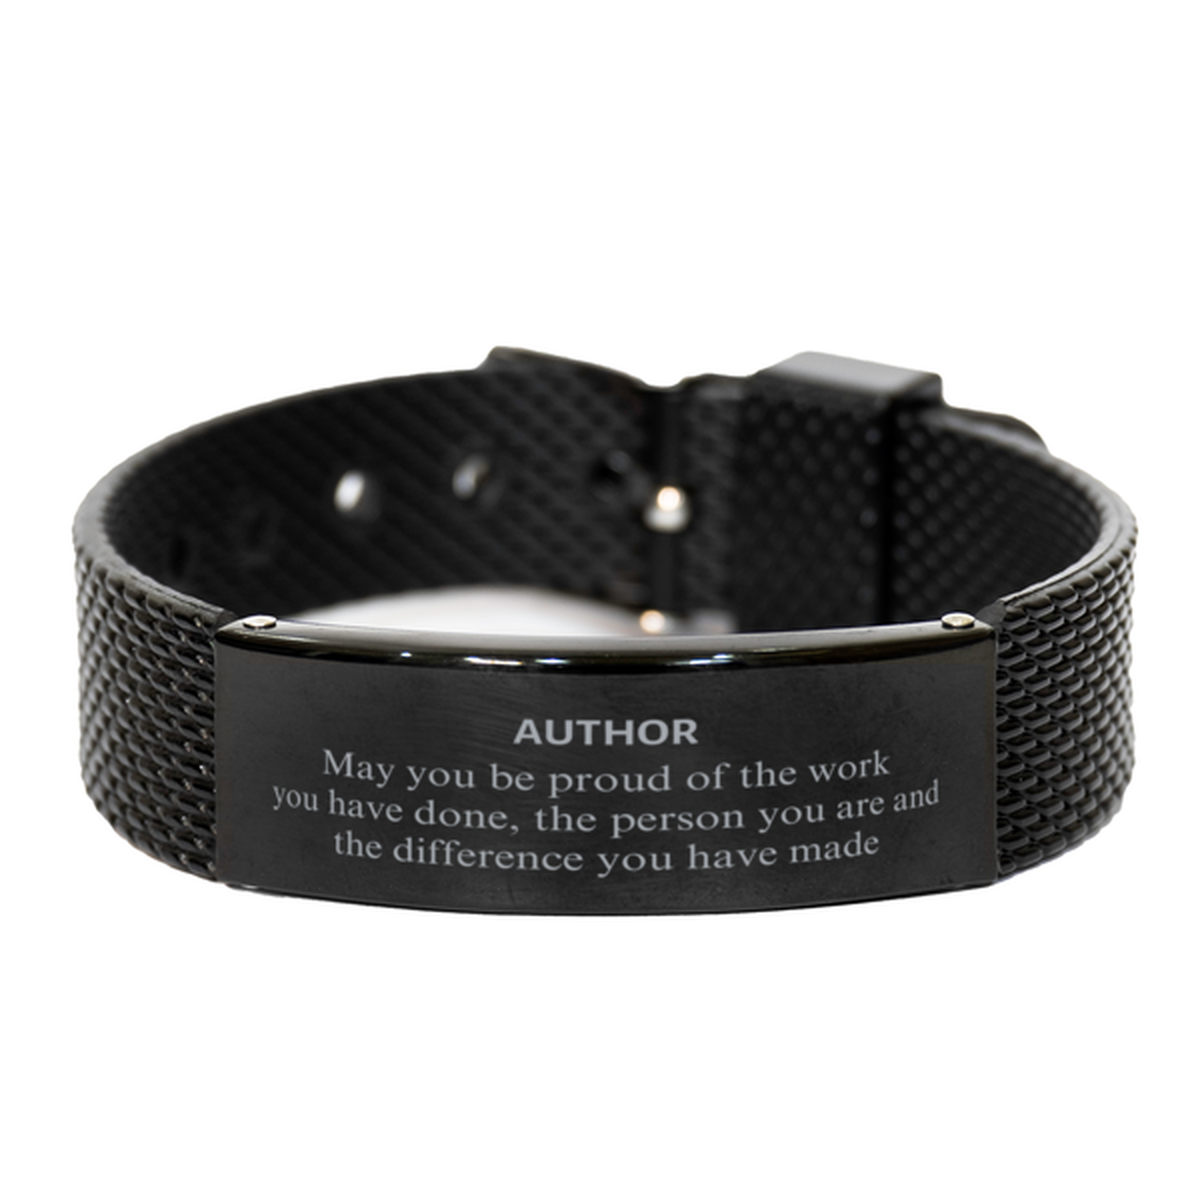 Author May you be proud of the work you have done, Retirement Author Black Shark Mesh Bracelet for Colleague Appreciation Gifts Amazing for Author